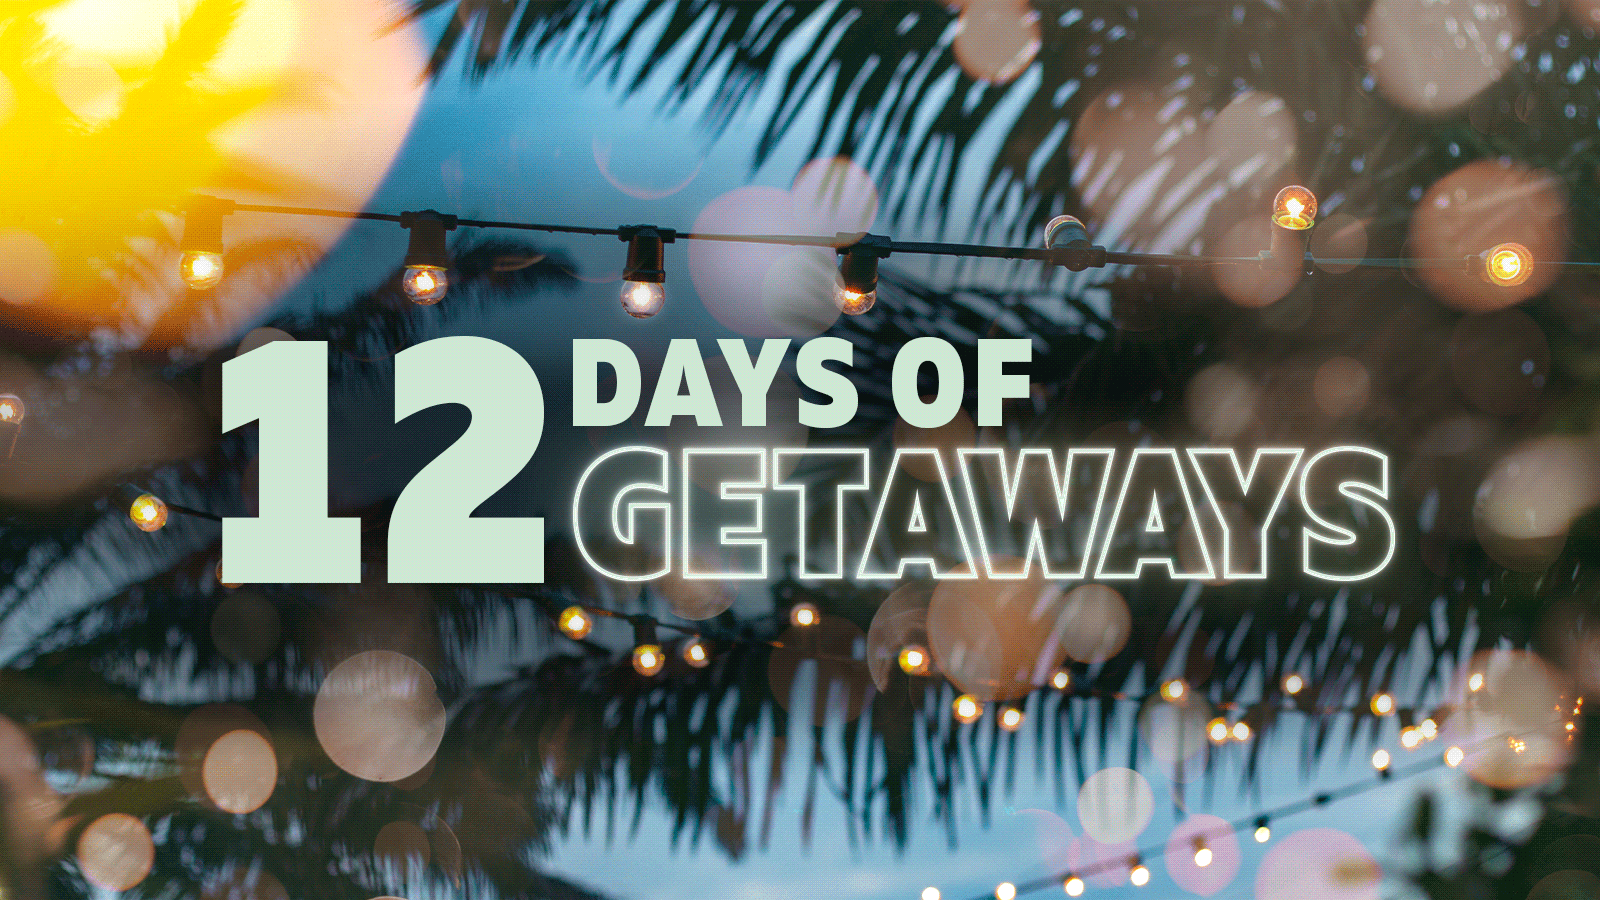 online contests, sweepstakes and giveaways - 12 Days of Getaways!